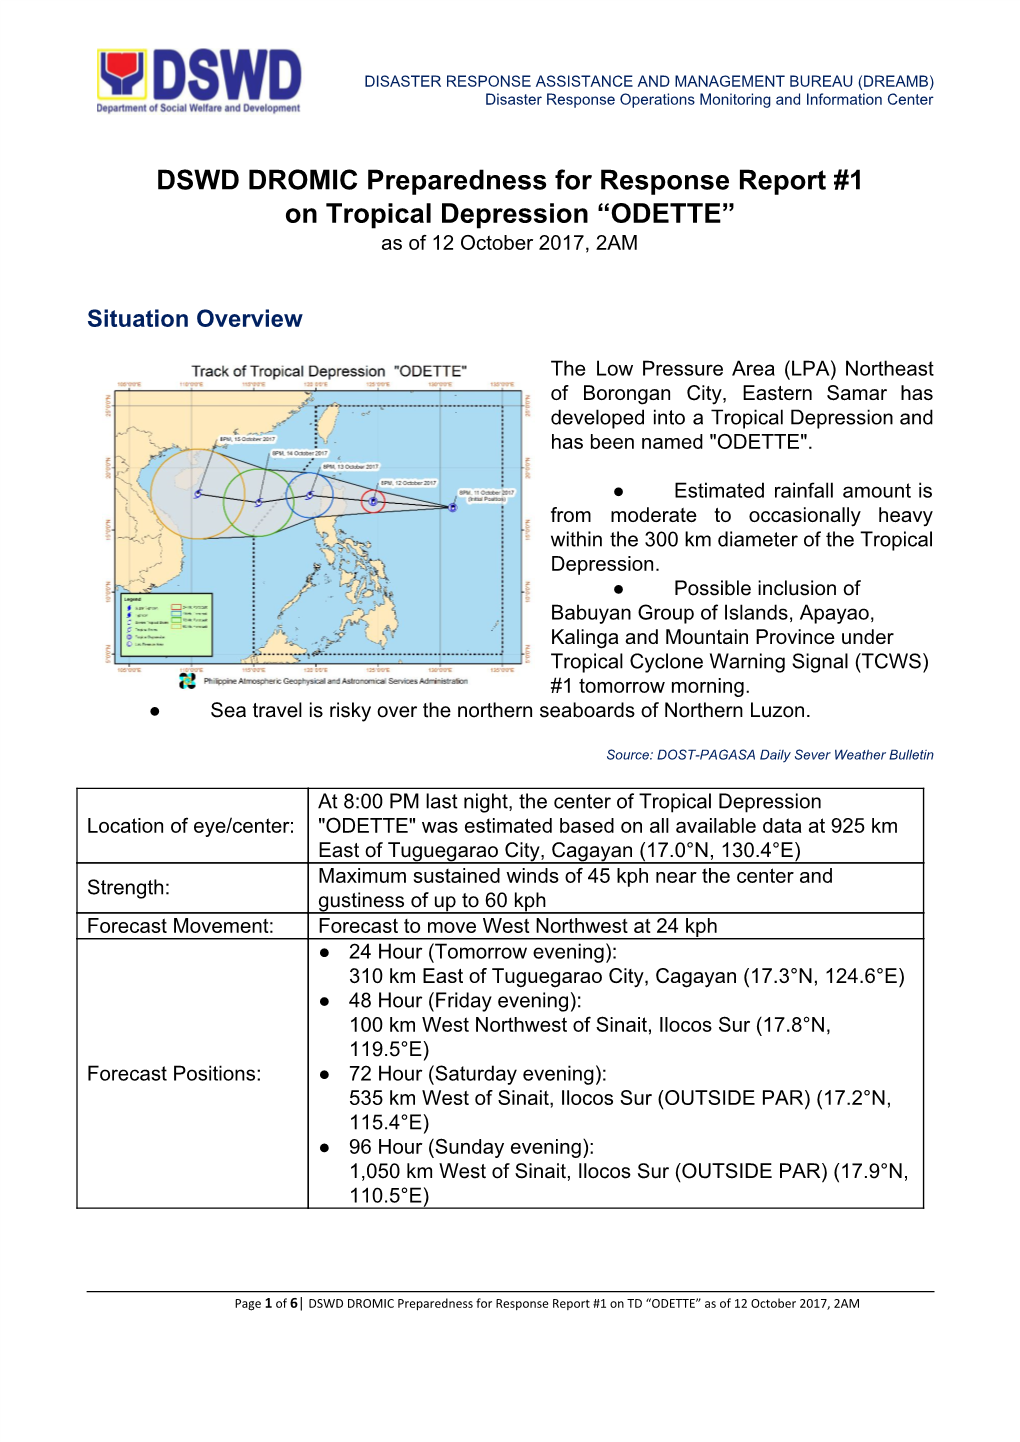 DSWD DROMIC Preparedness for Response Report #1 ​ ​ ​ ​ ​ ​ ​ ​ ​ ​ ​ ​ on Tropical Depression “ODETTE” ​ ​ As of 12​ ​ October 2017,​ 2AM​ ​ ​ ​ ​ ​ ​ ​ ​ ​ ​